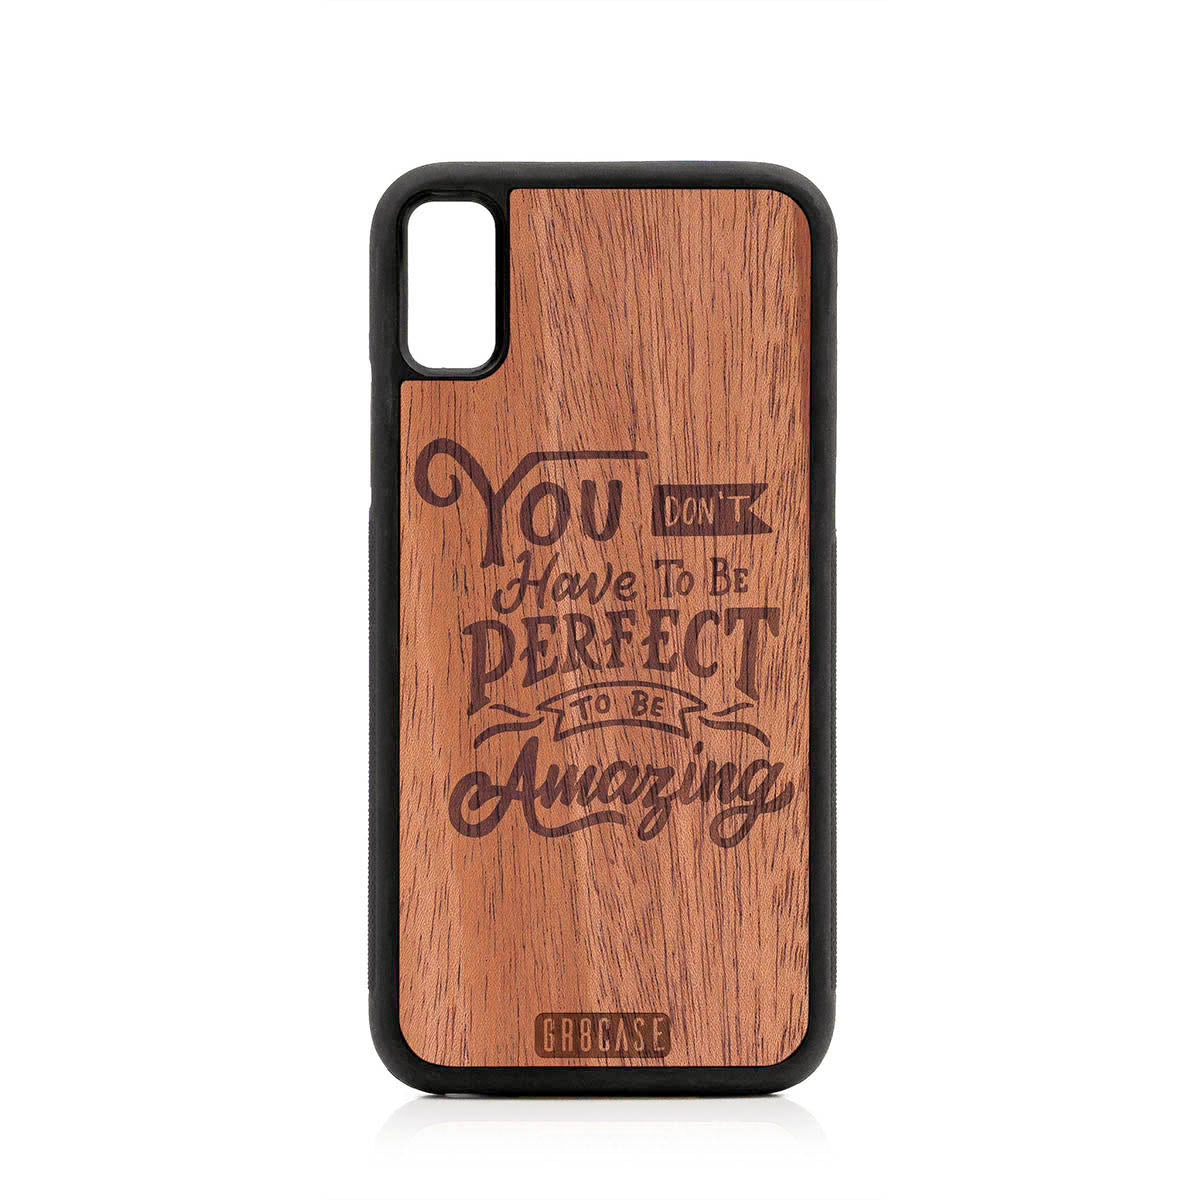 You Don't Have To Be Perfect To Be Amazing Design Wood Case For iPhone X/XS